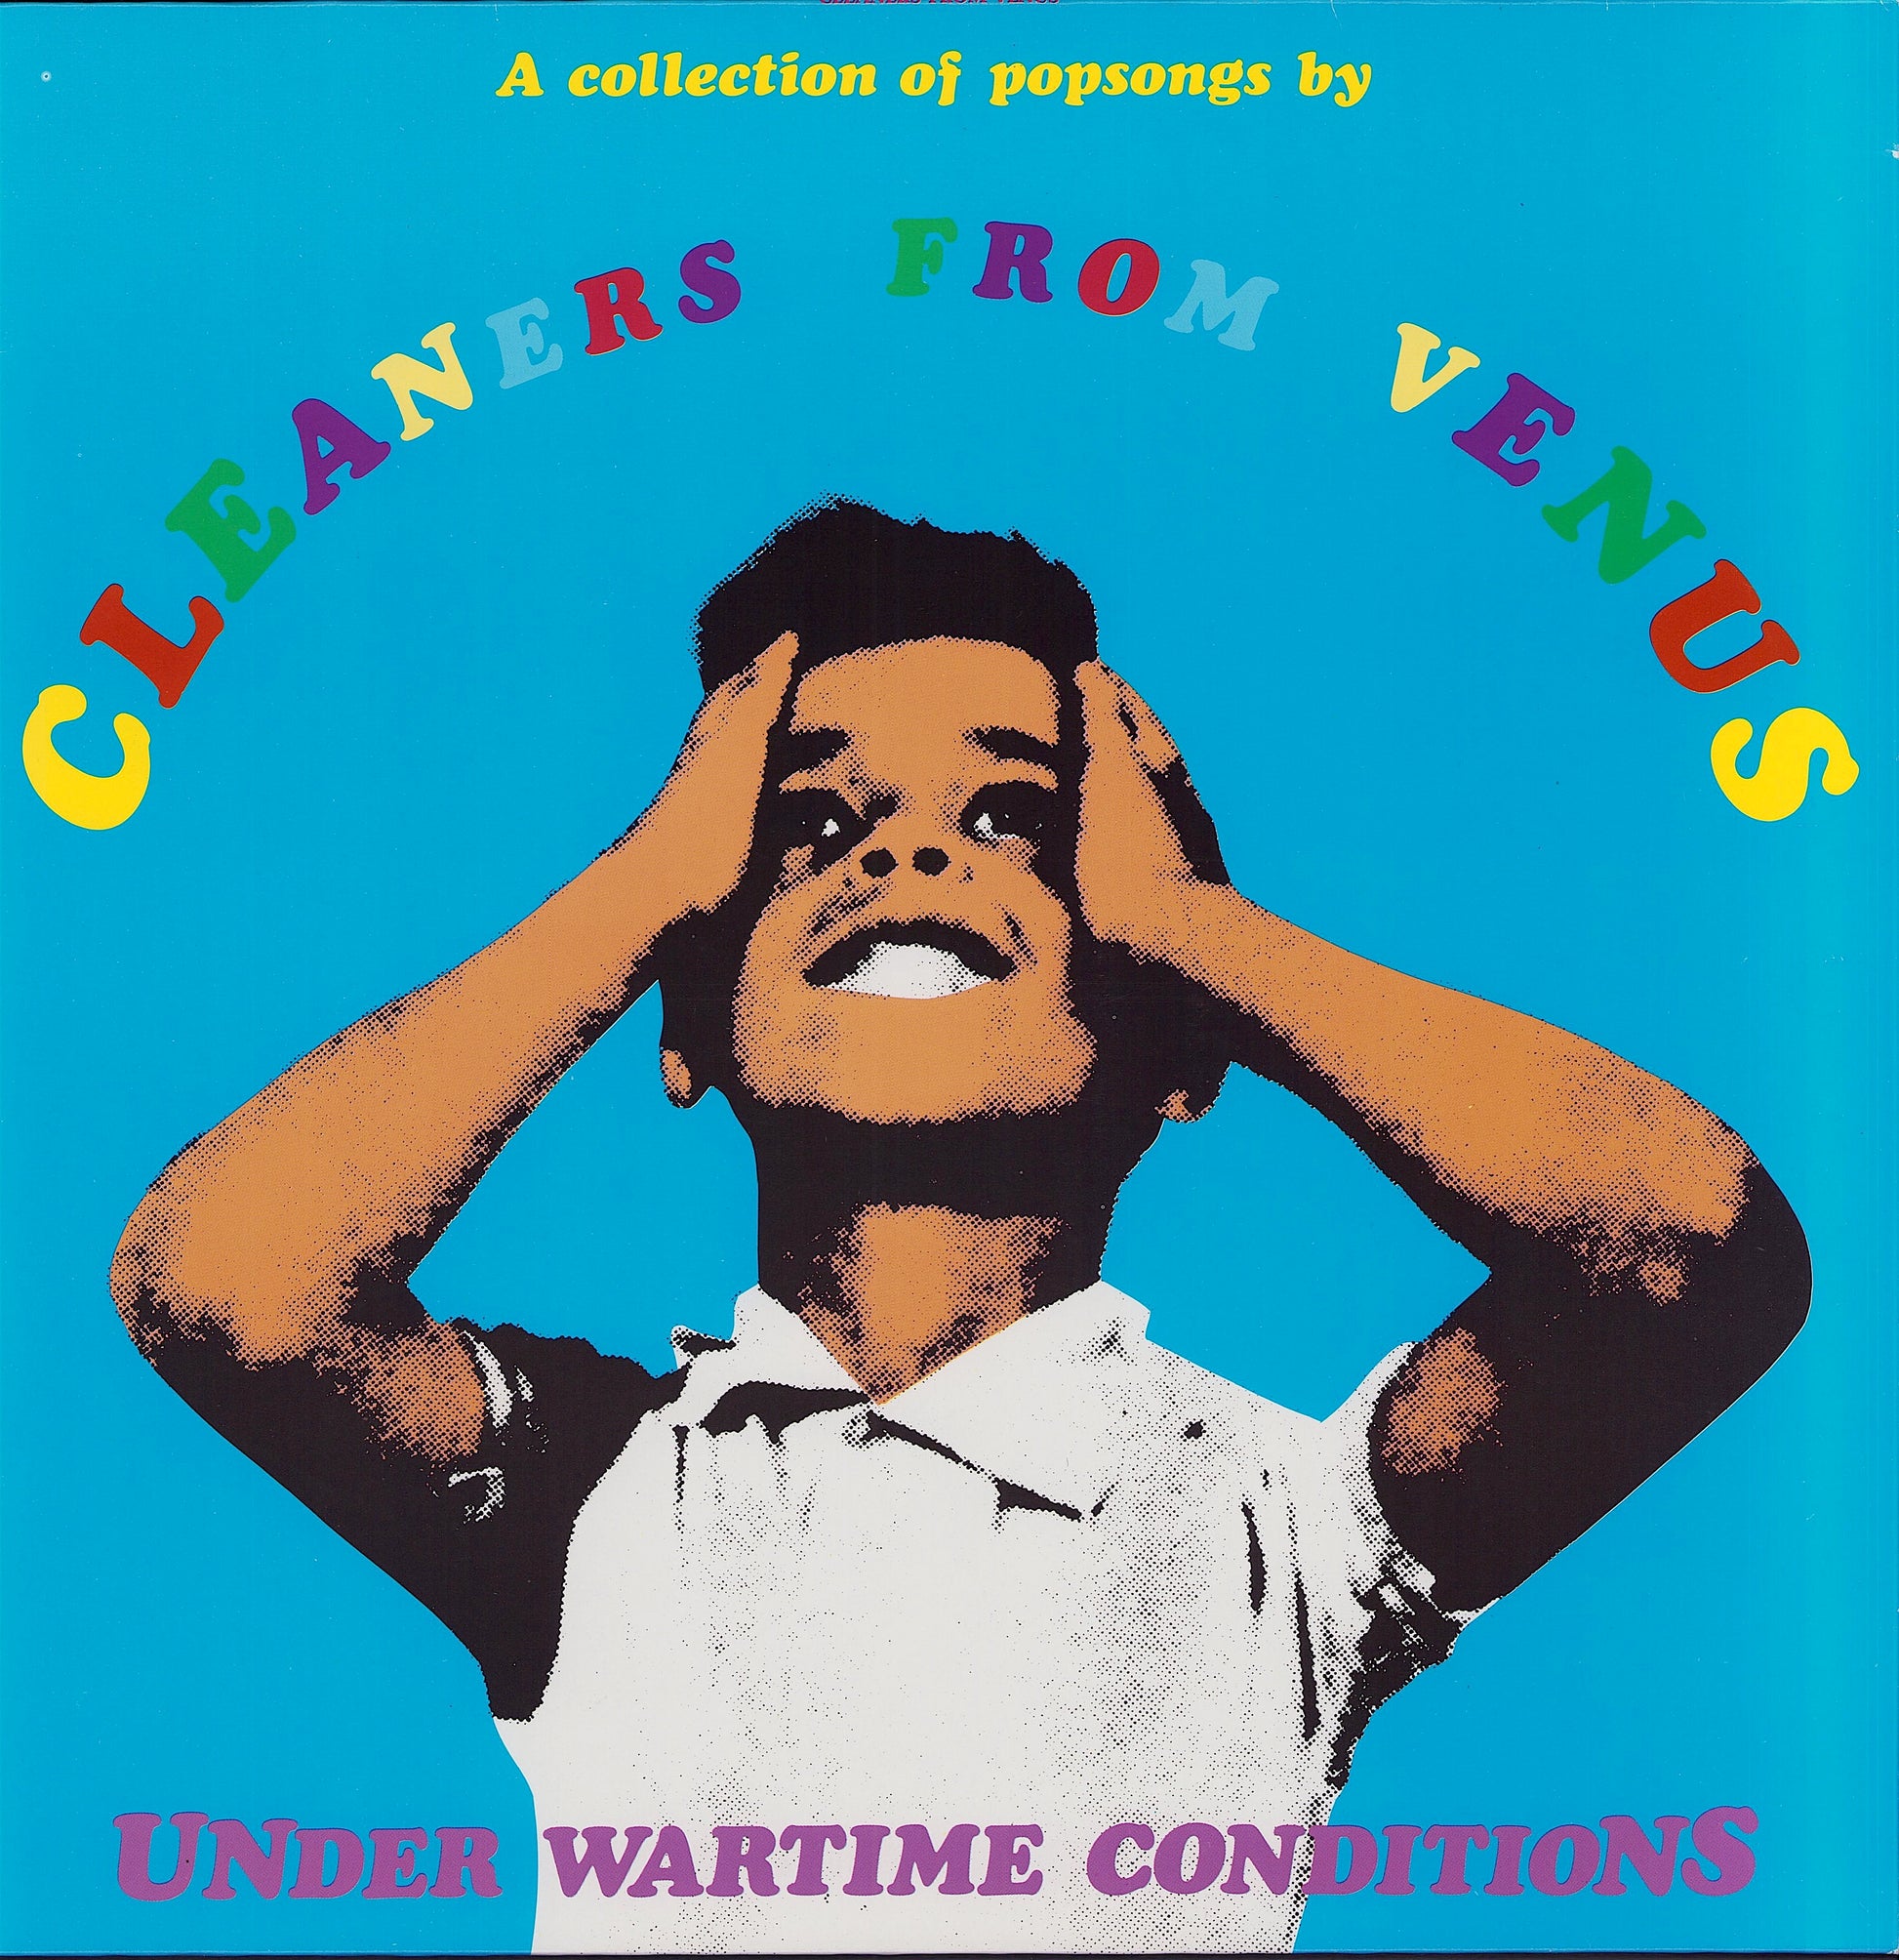 Cleaners From Venus - Under Wartime Conditions (Vinyl LP) 